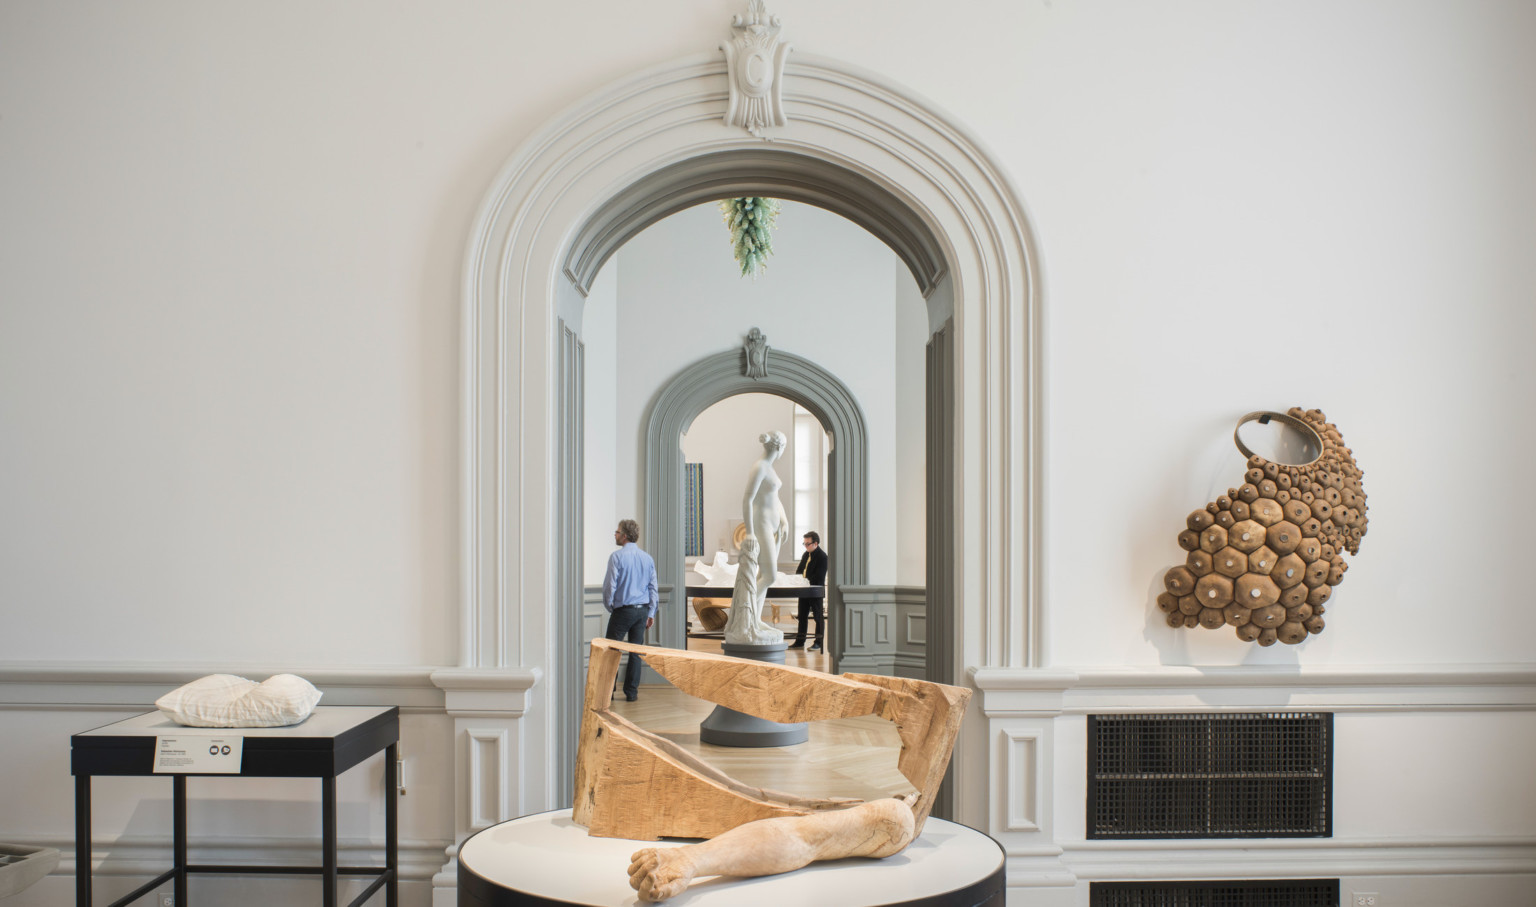 Abstract art object table display framed at back by arched door with crown molding at the renwick gallery